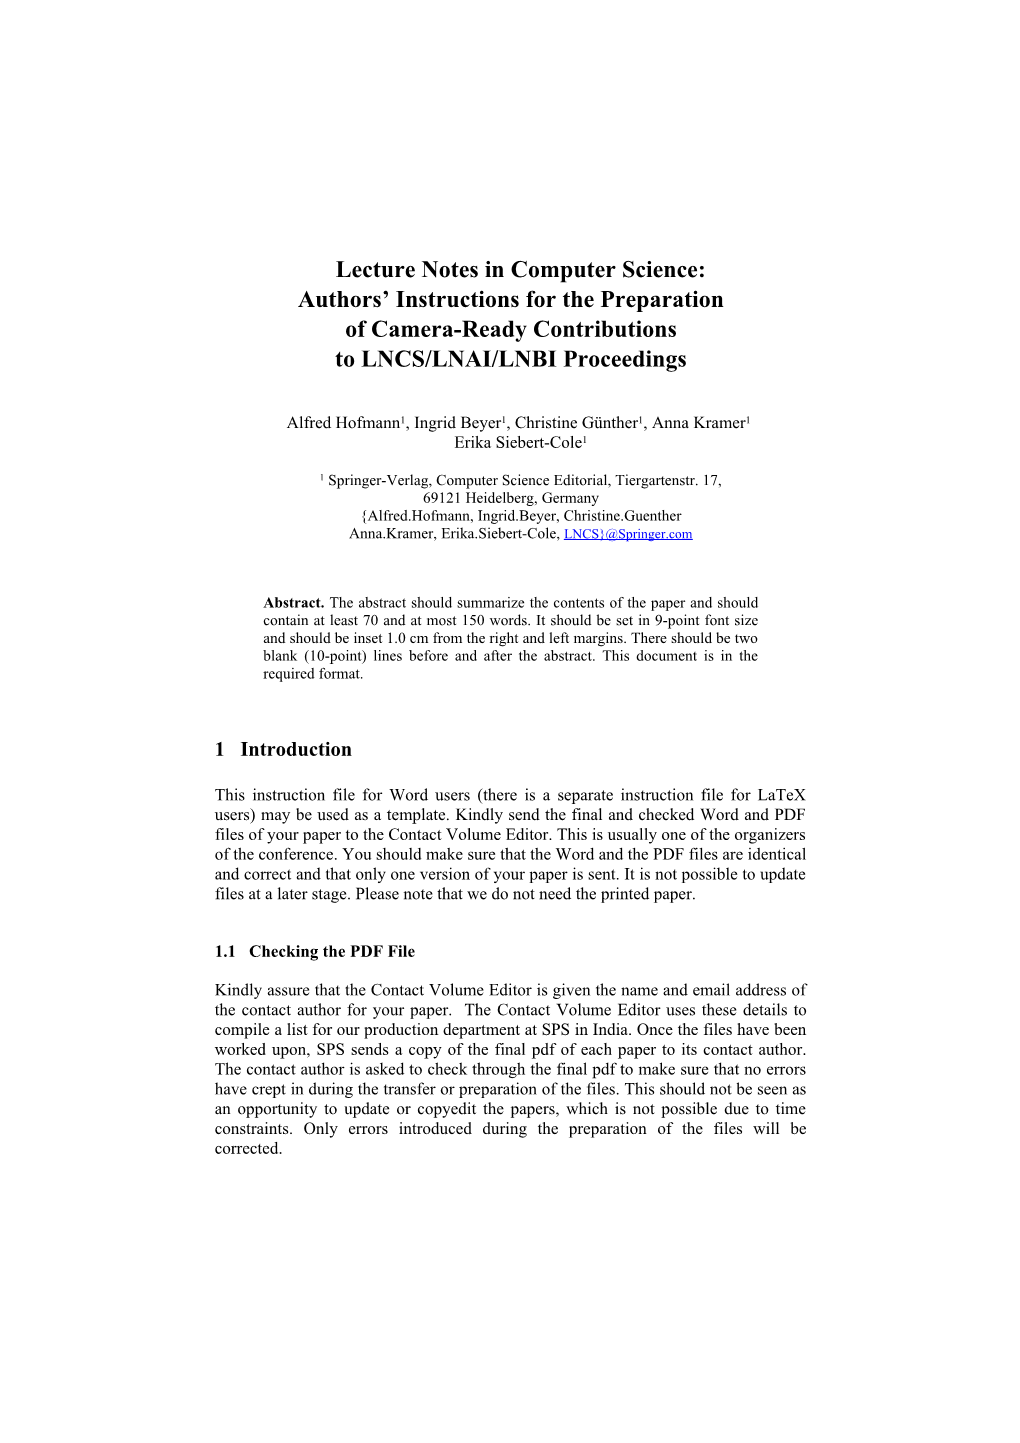 Lecture Notes in Computer Science: Authors Instructions for the Preparation of Camera-Ready s1